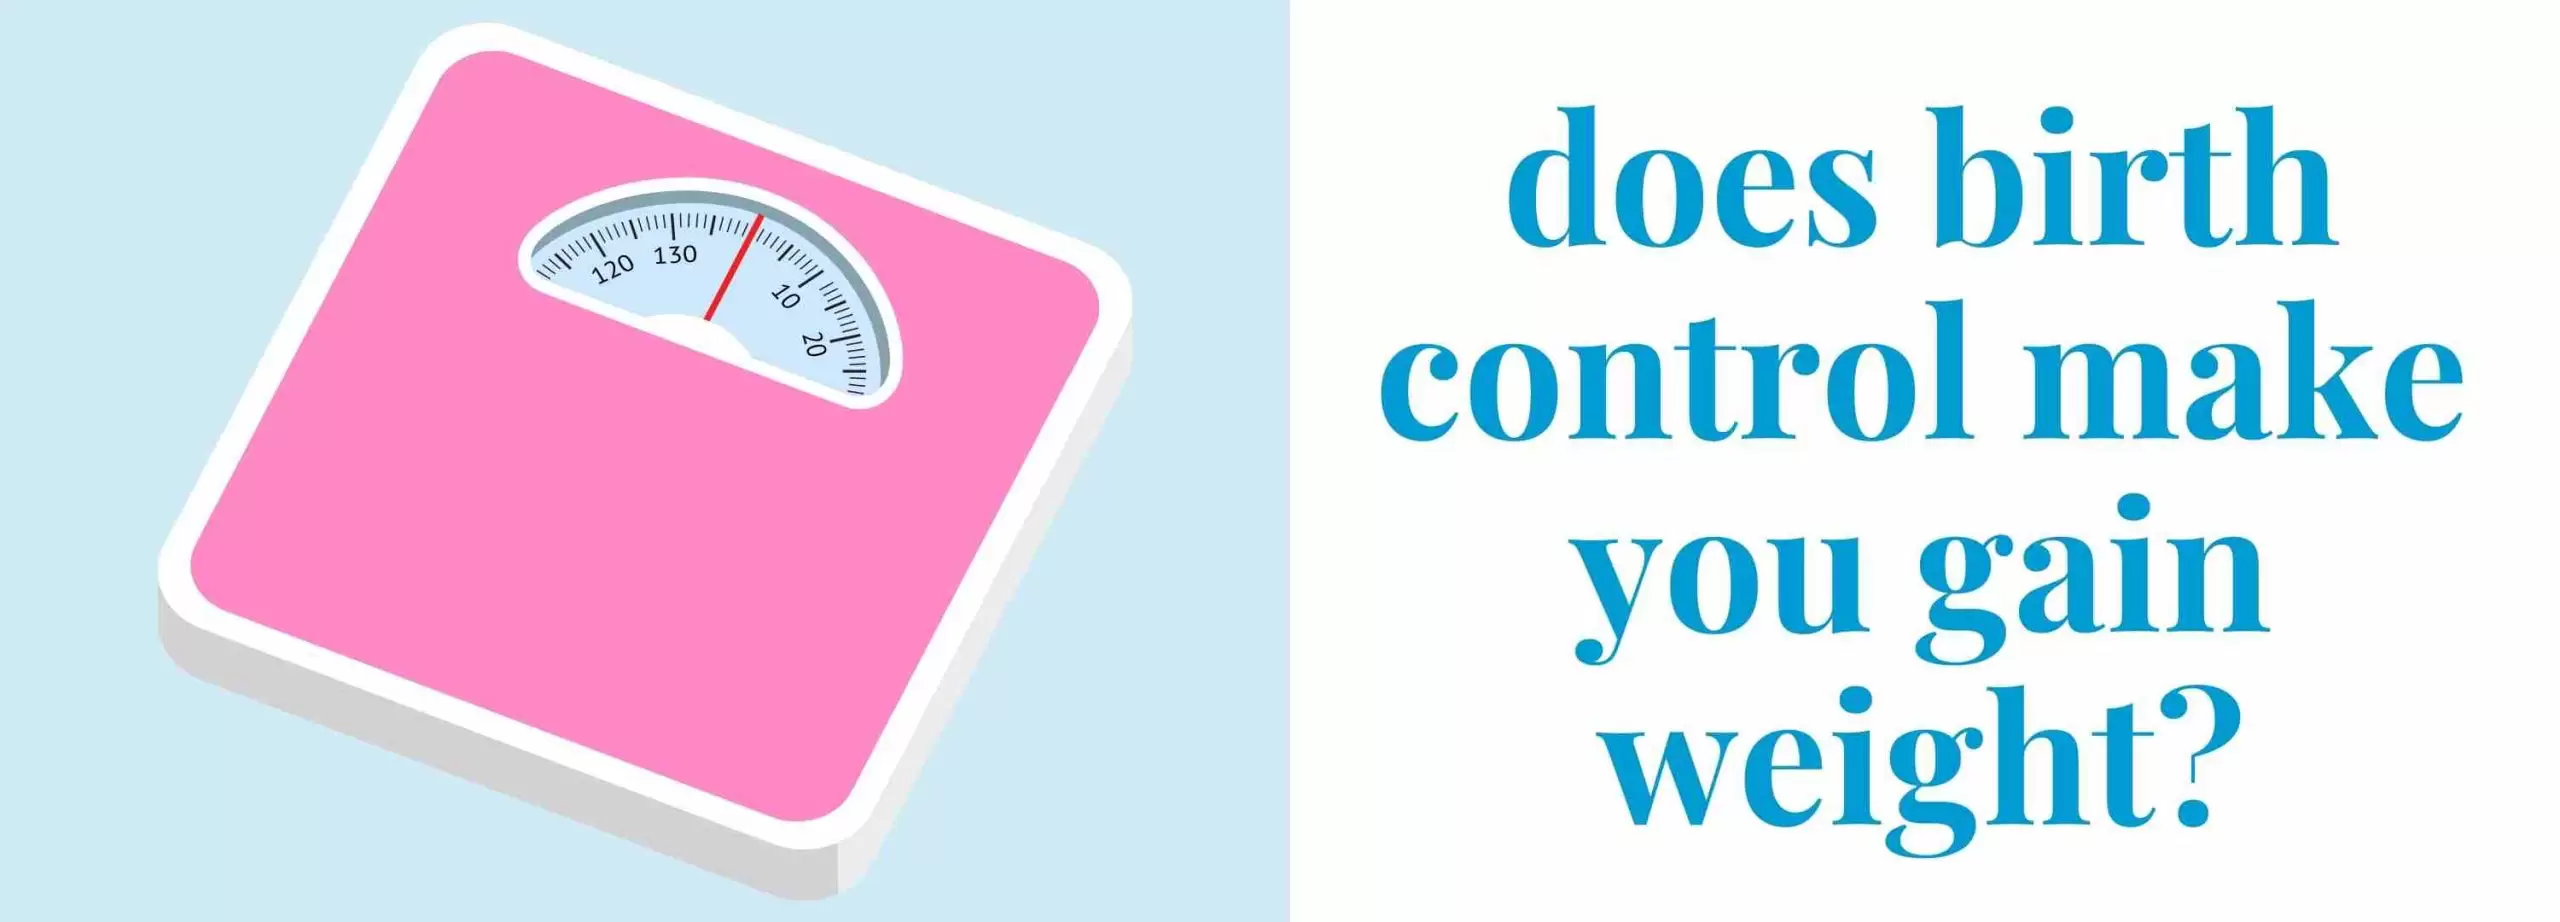 does birth control make you gain weight banner